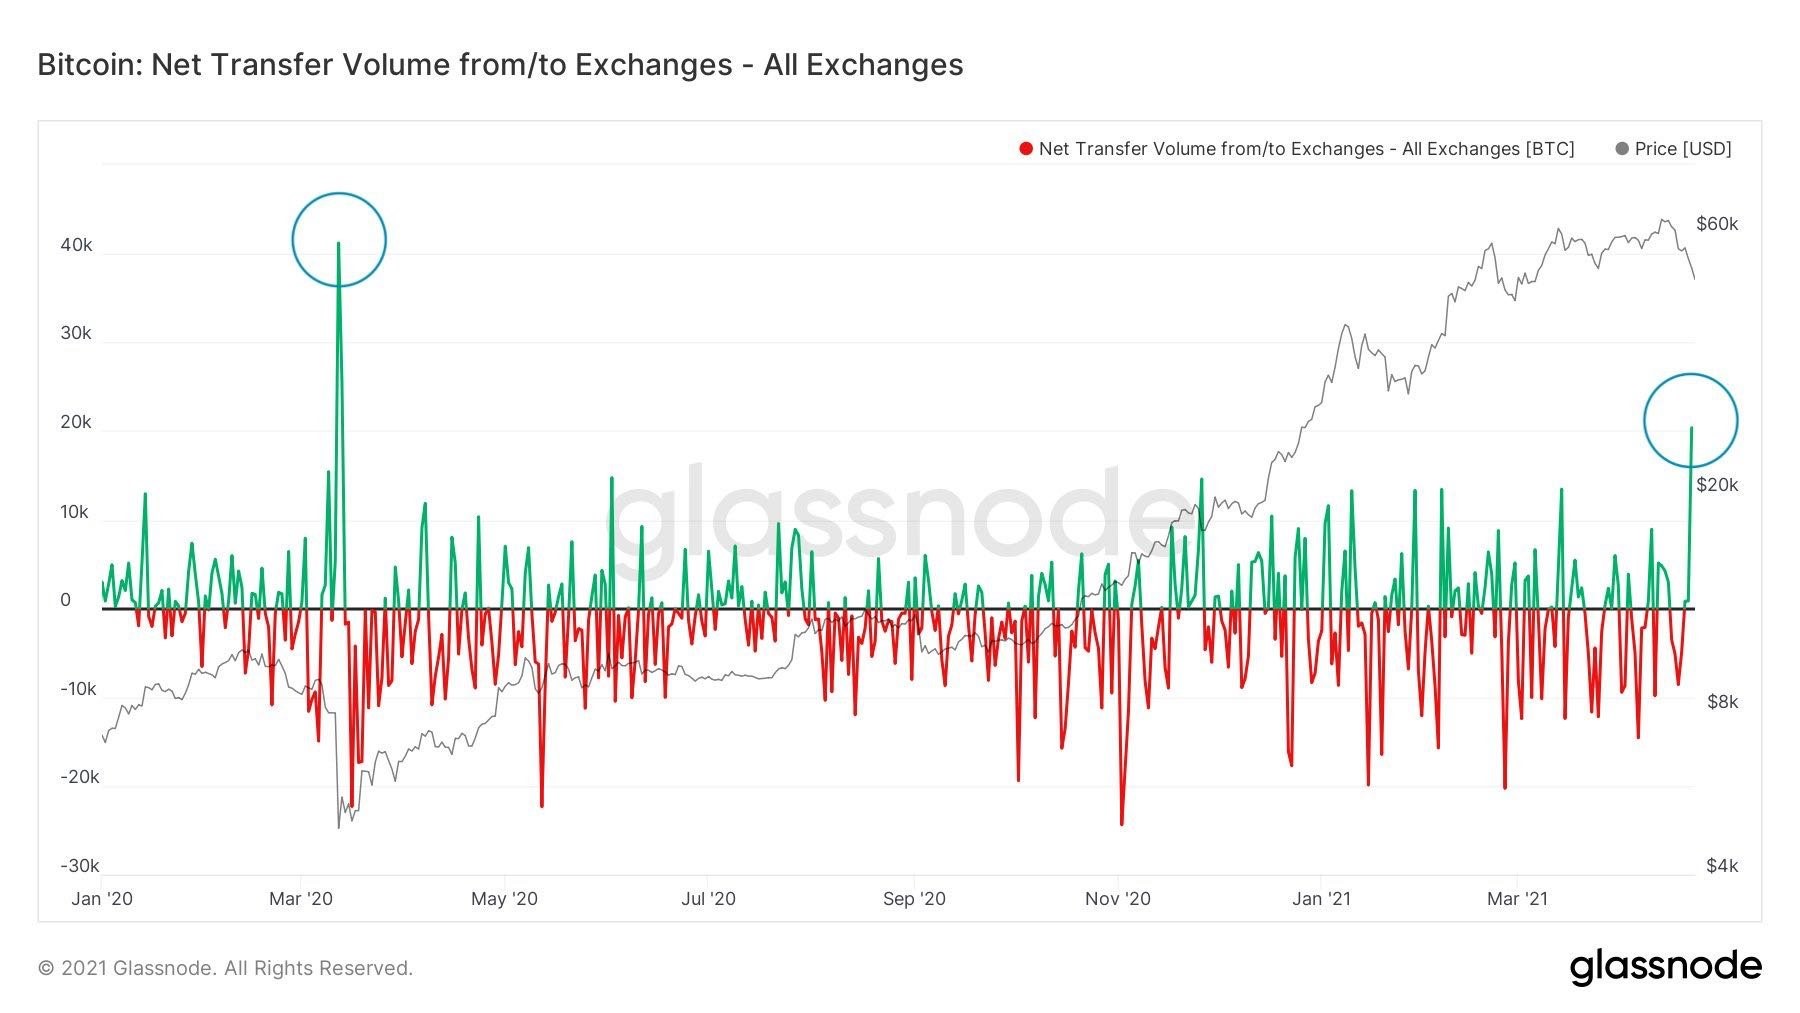 Bitcoin - Net transfer volume from-to exchanges